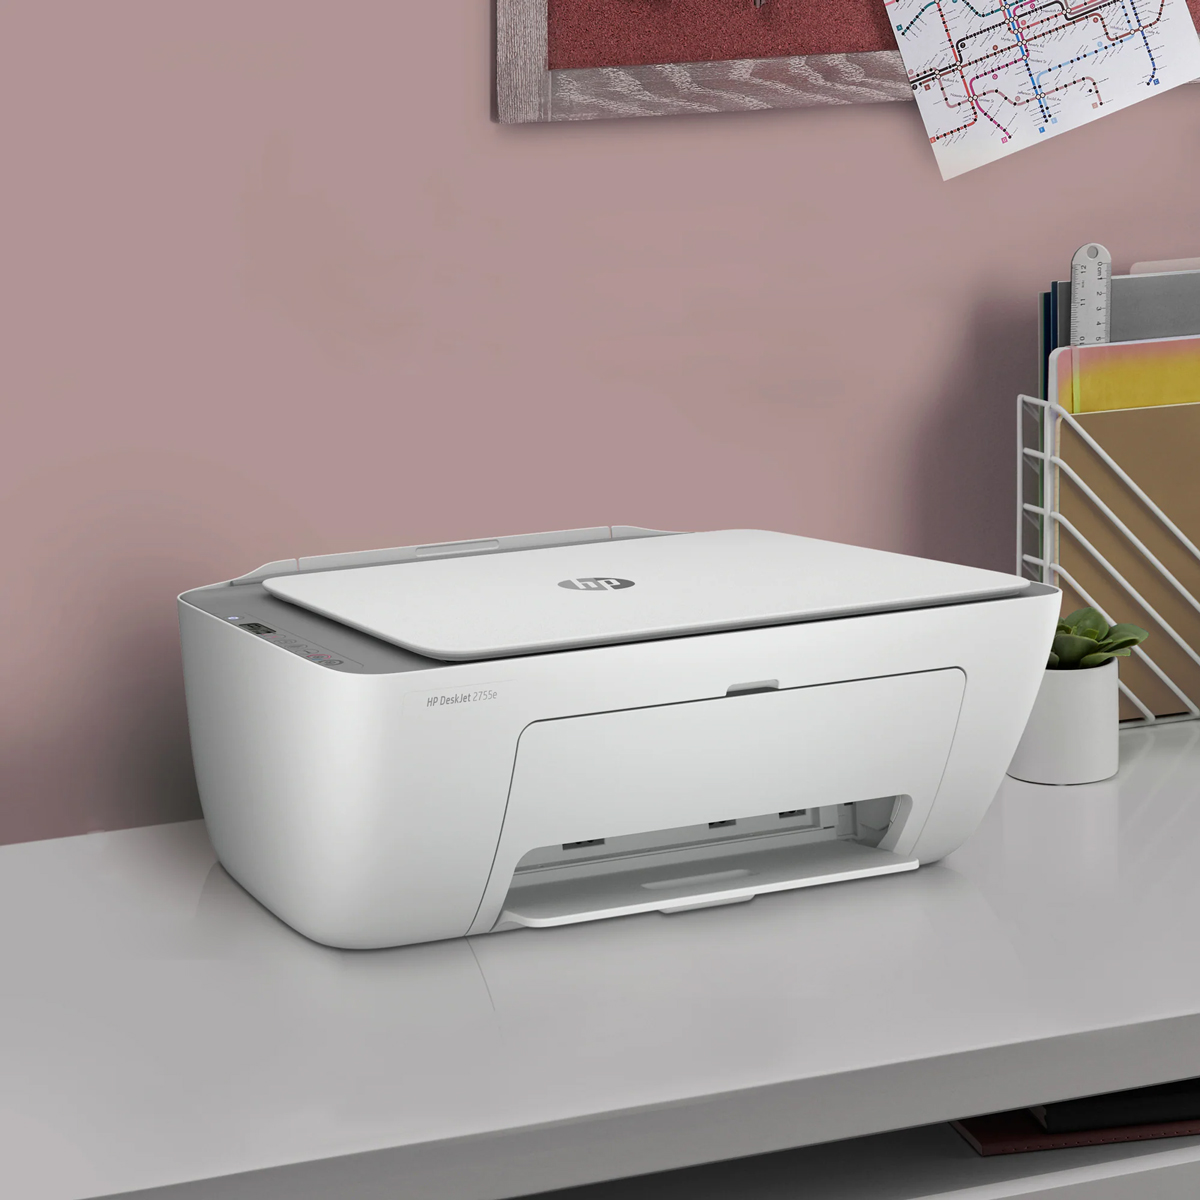 Best Printer for the home in 2023